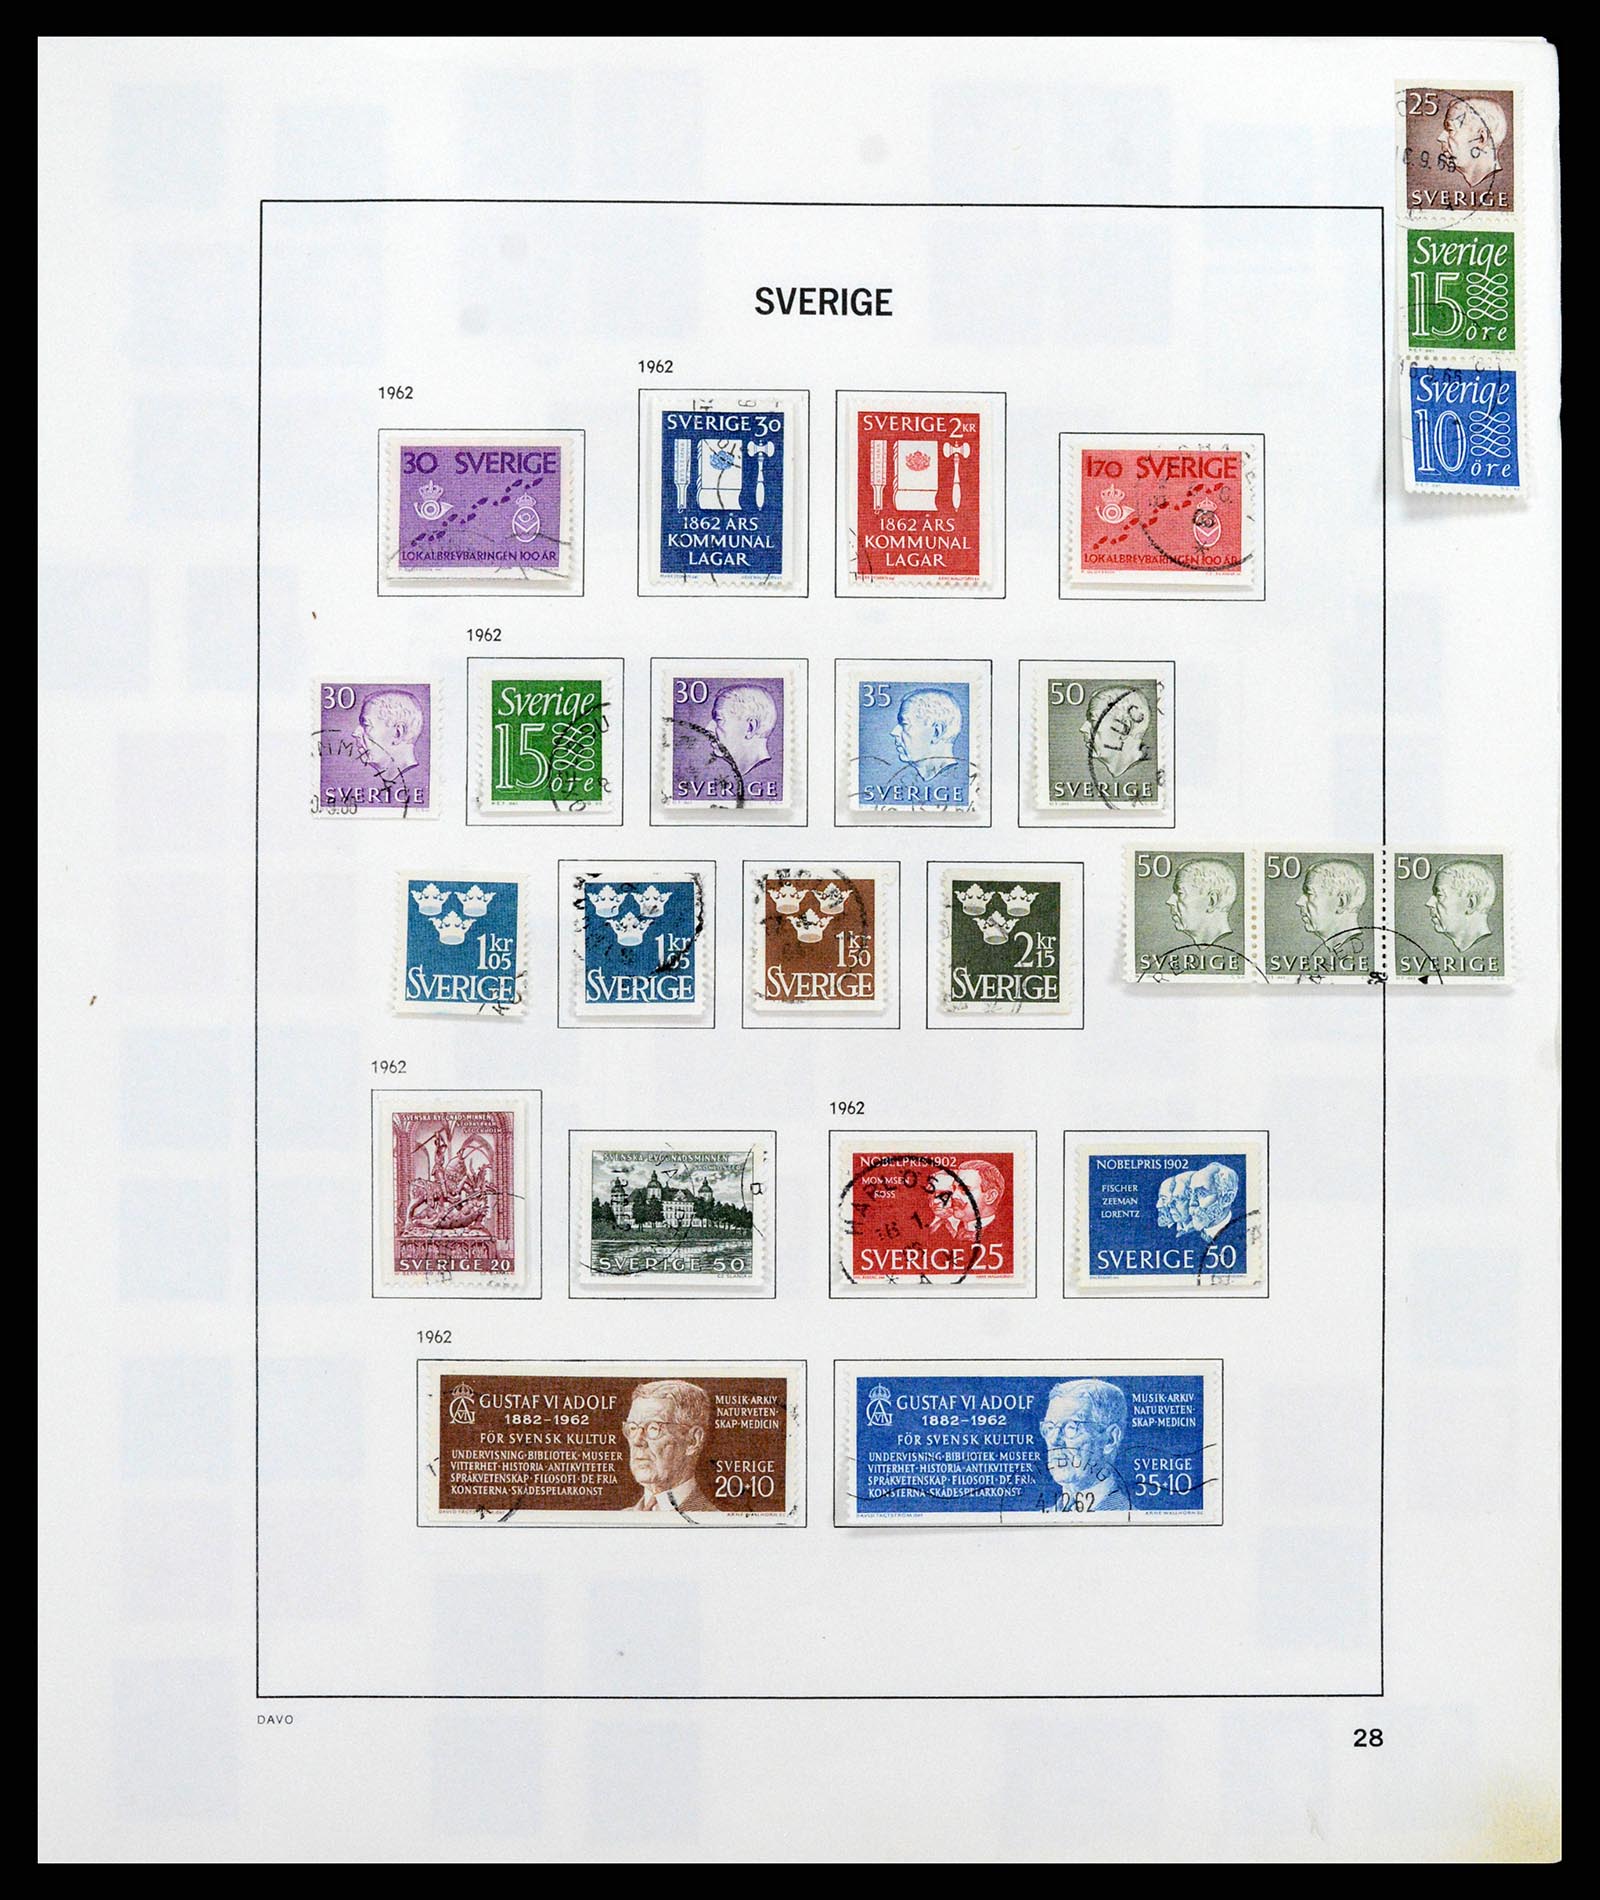 37414 042 - Stamp collection 37414 Sweden 1855-1997.